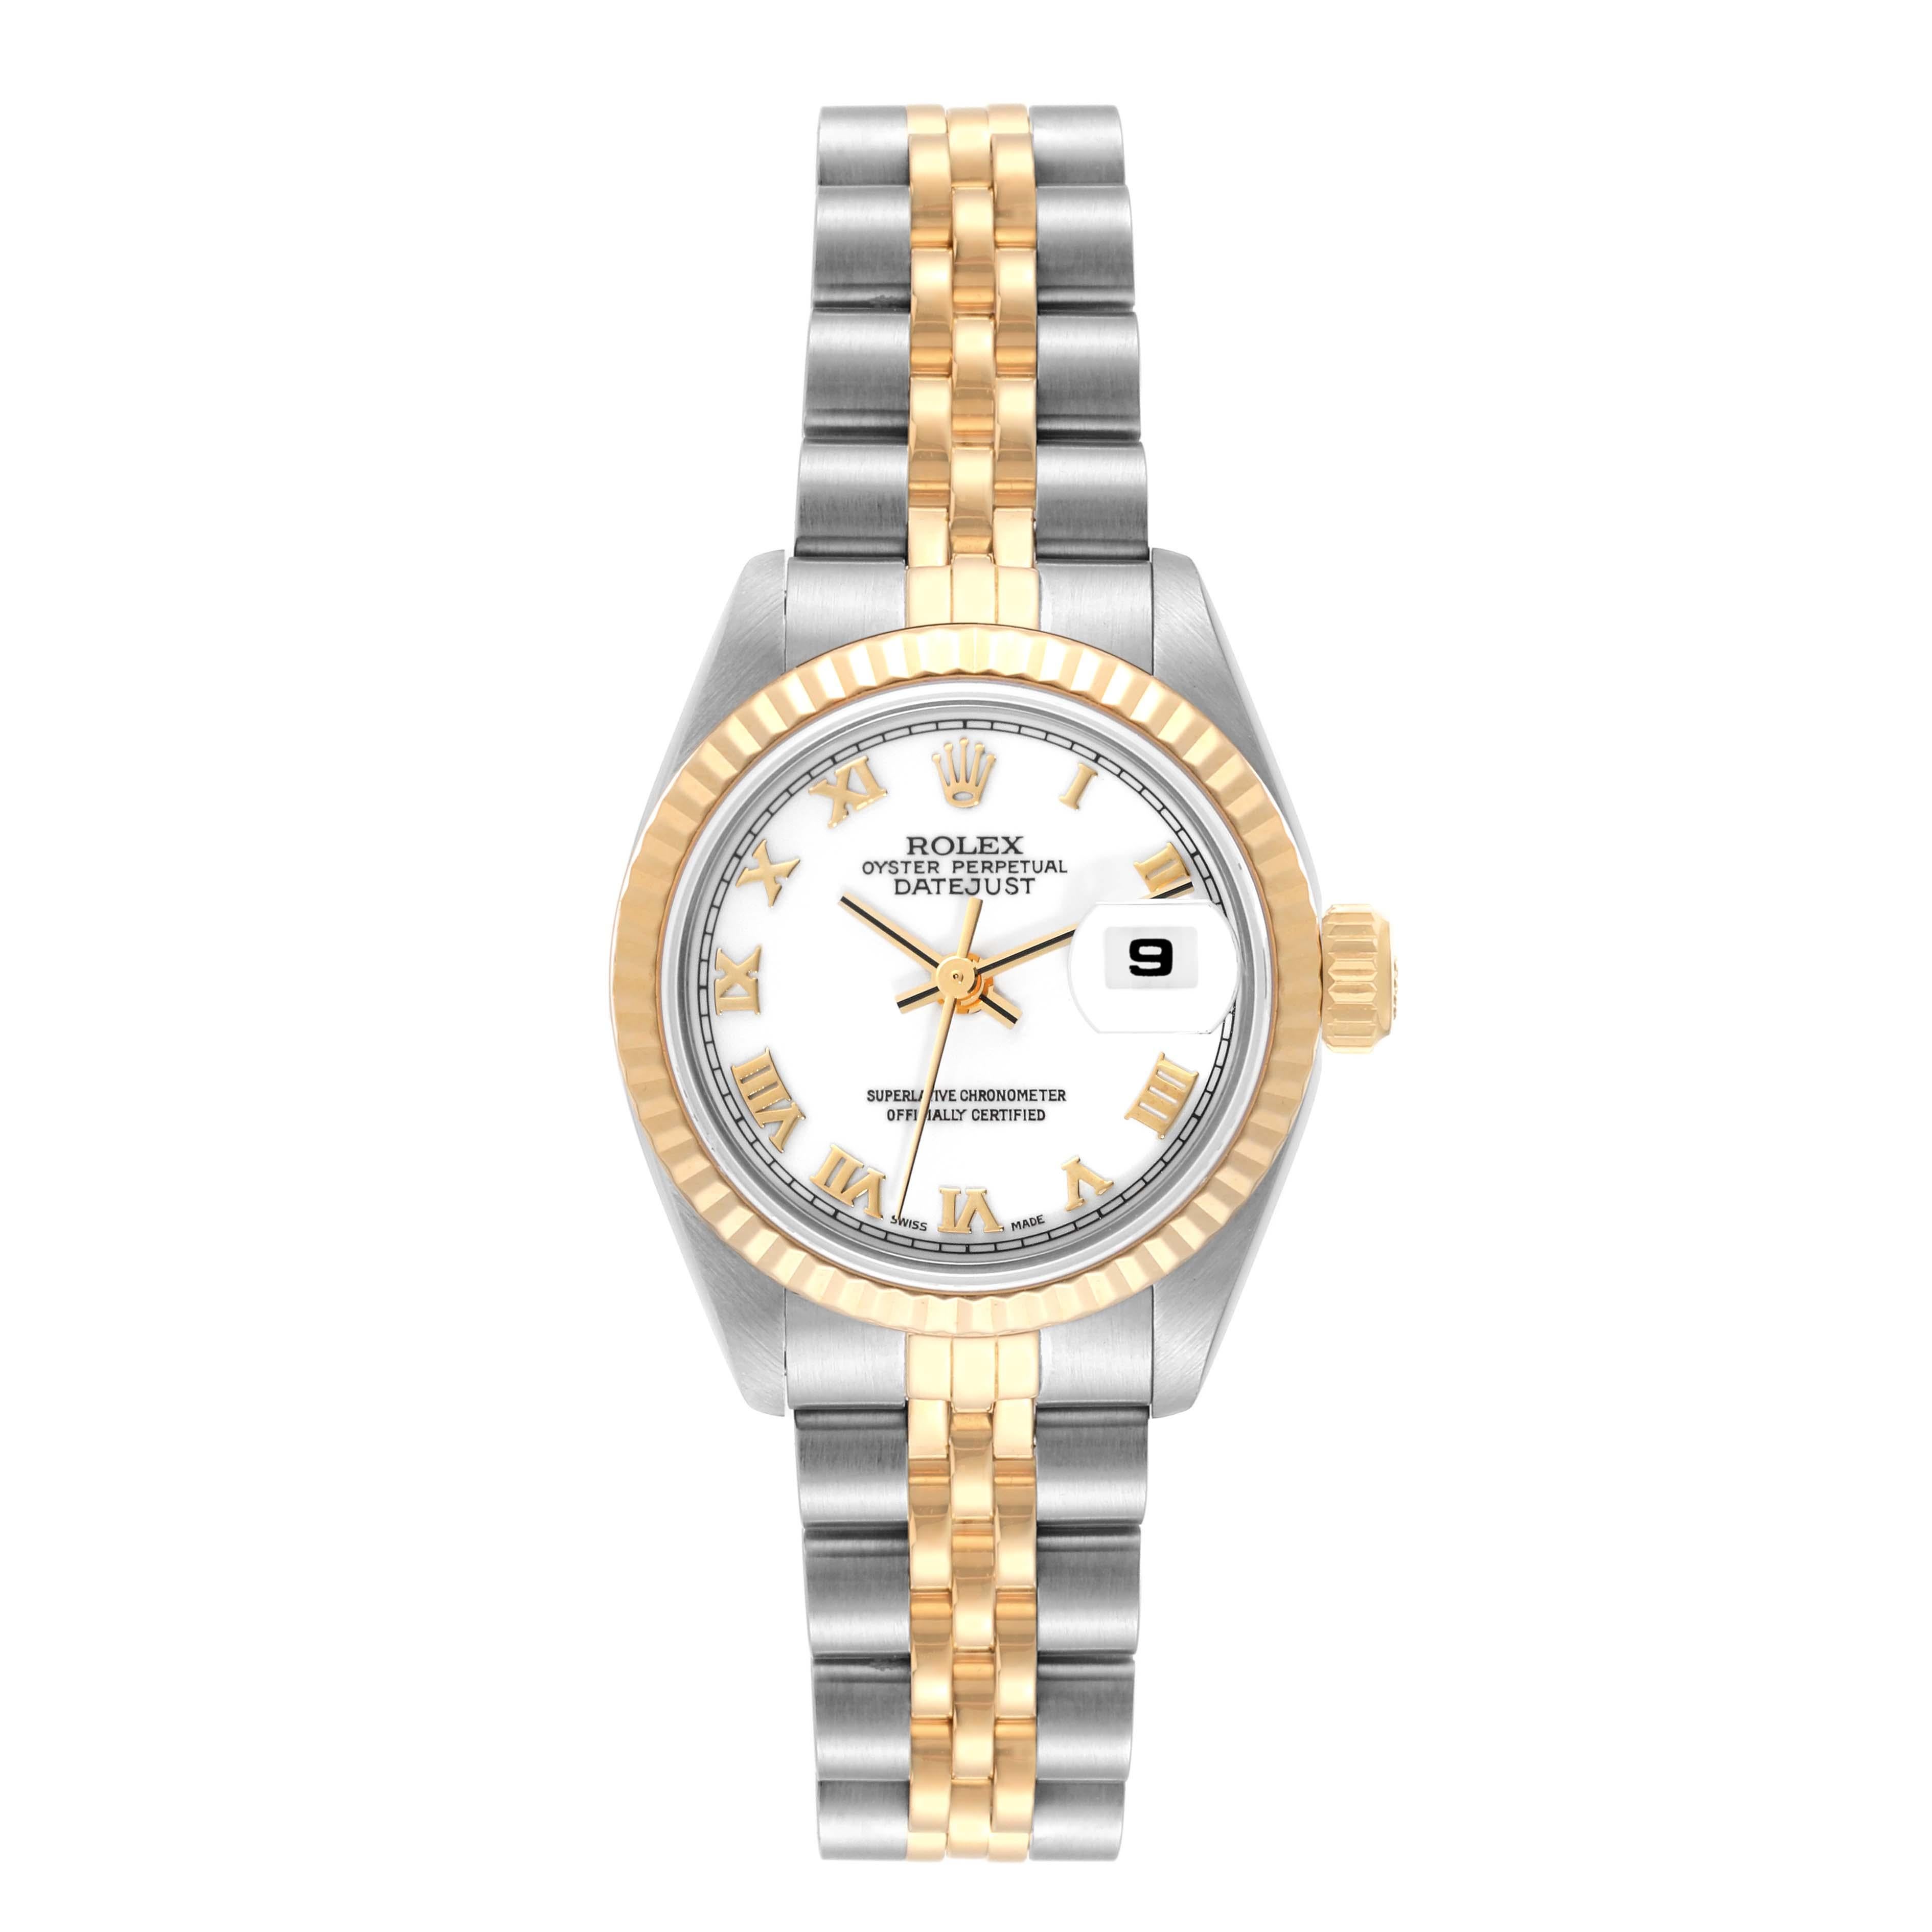 Rolex Datejust White Dial Steel Yellow Gold Ladies Watch 69173. Officially certified chronometer automatic self-winding movement. Stainless steel oyster case 26.0 mm in diameter. Rolex logo on the crown. 18k yellow gold fluted bezel. Scratch